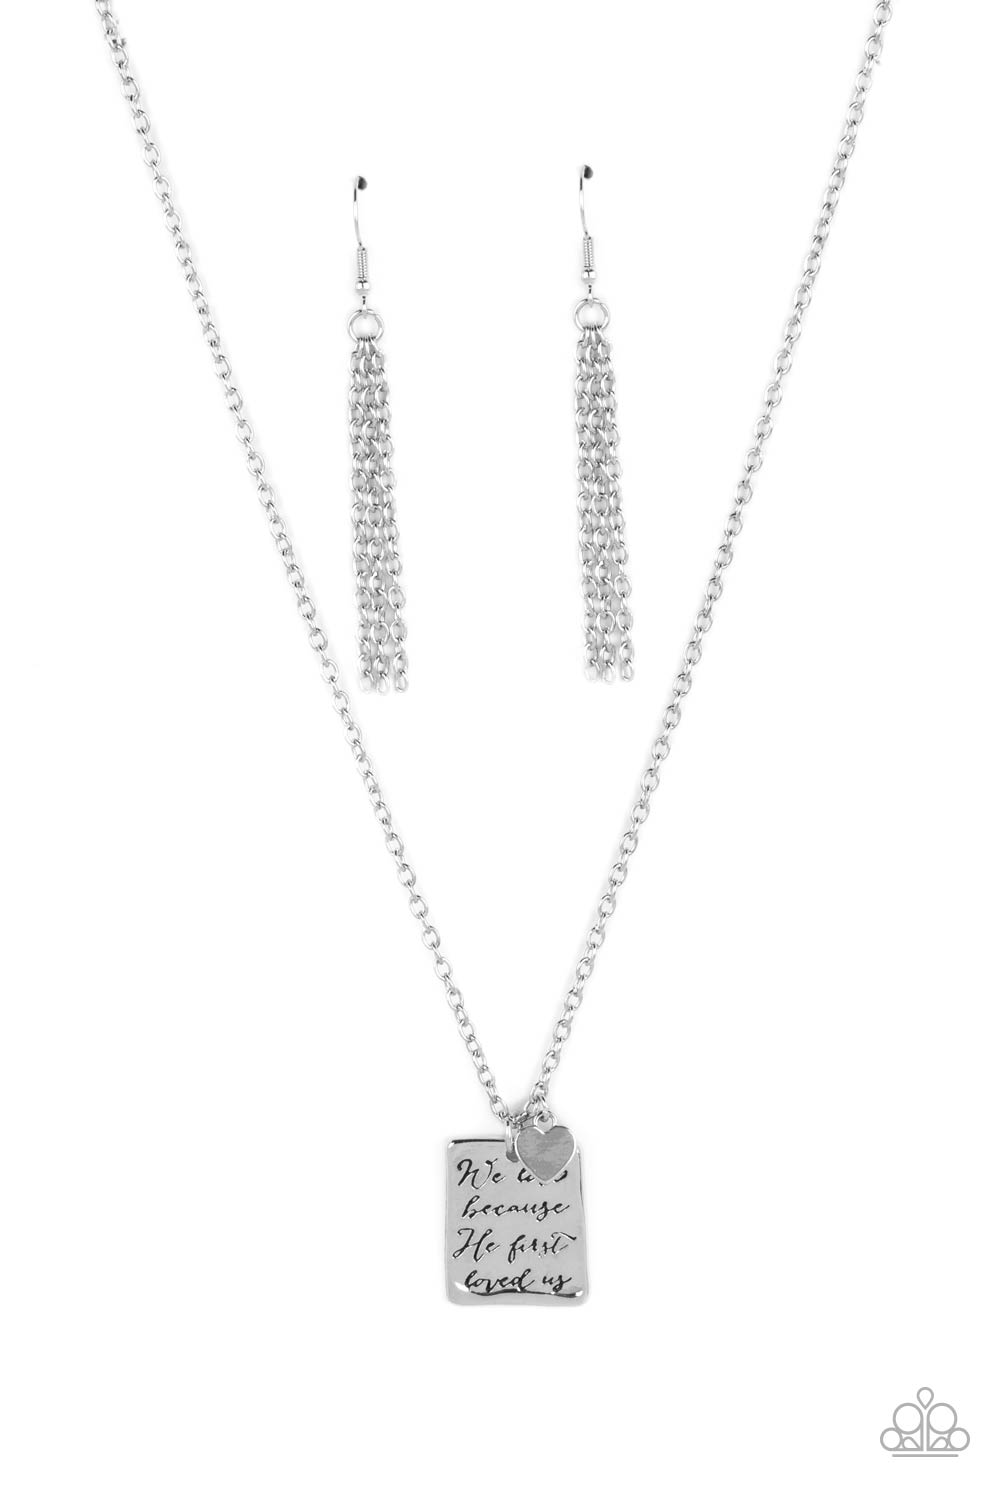 Paparazzi Accessories Divine Devotion - Silver Dangling below a delicate silver chain, a hammered rectangular plate swings for some light-catching movement. The religious phrase "We love because He first loved us" is prominently stamped in the center of t